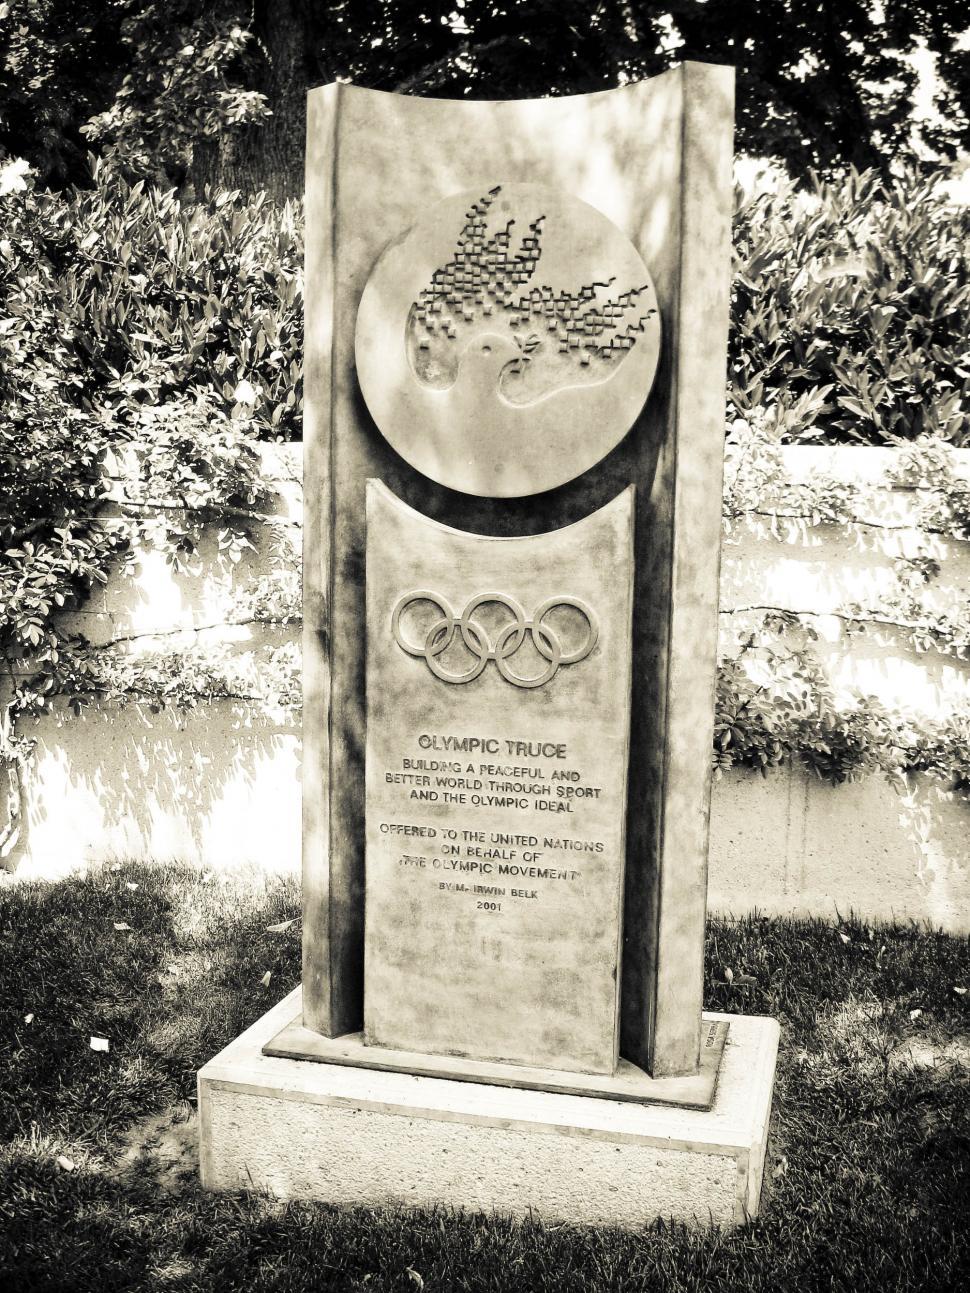 Free Image of Olympic truce monument 